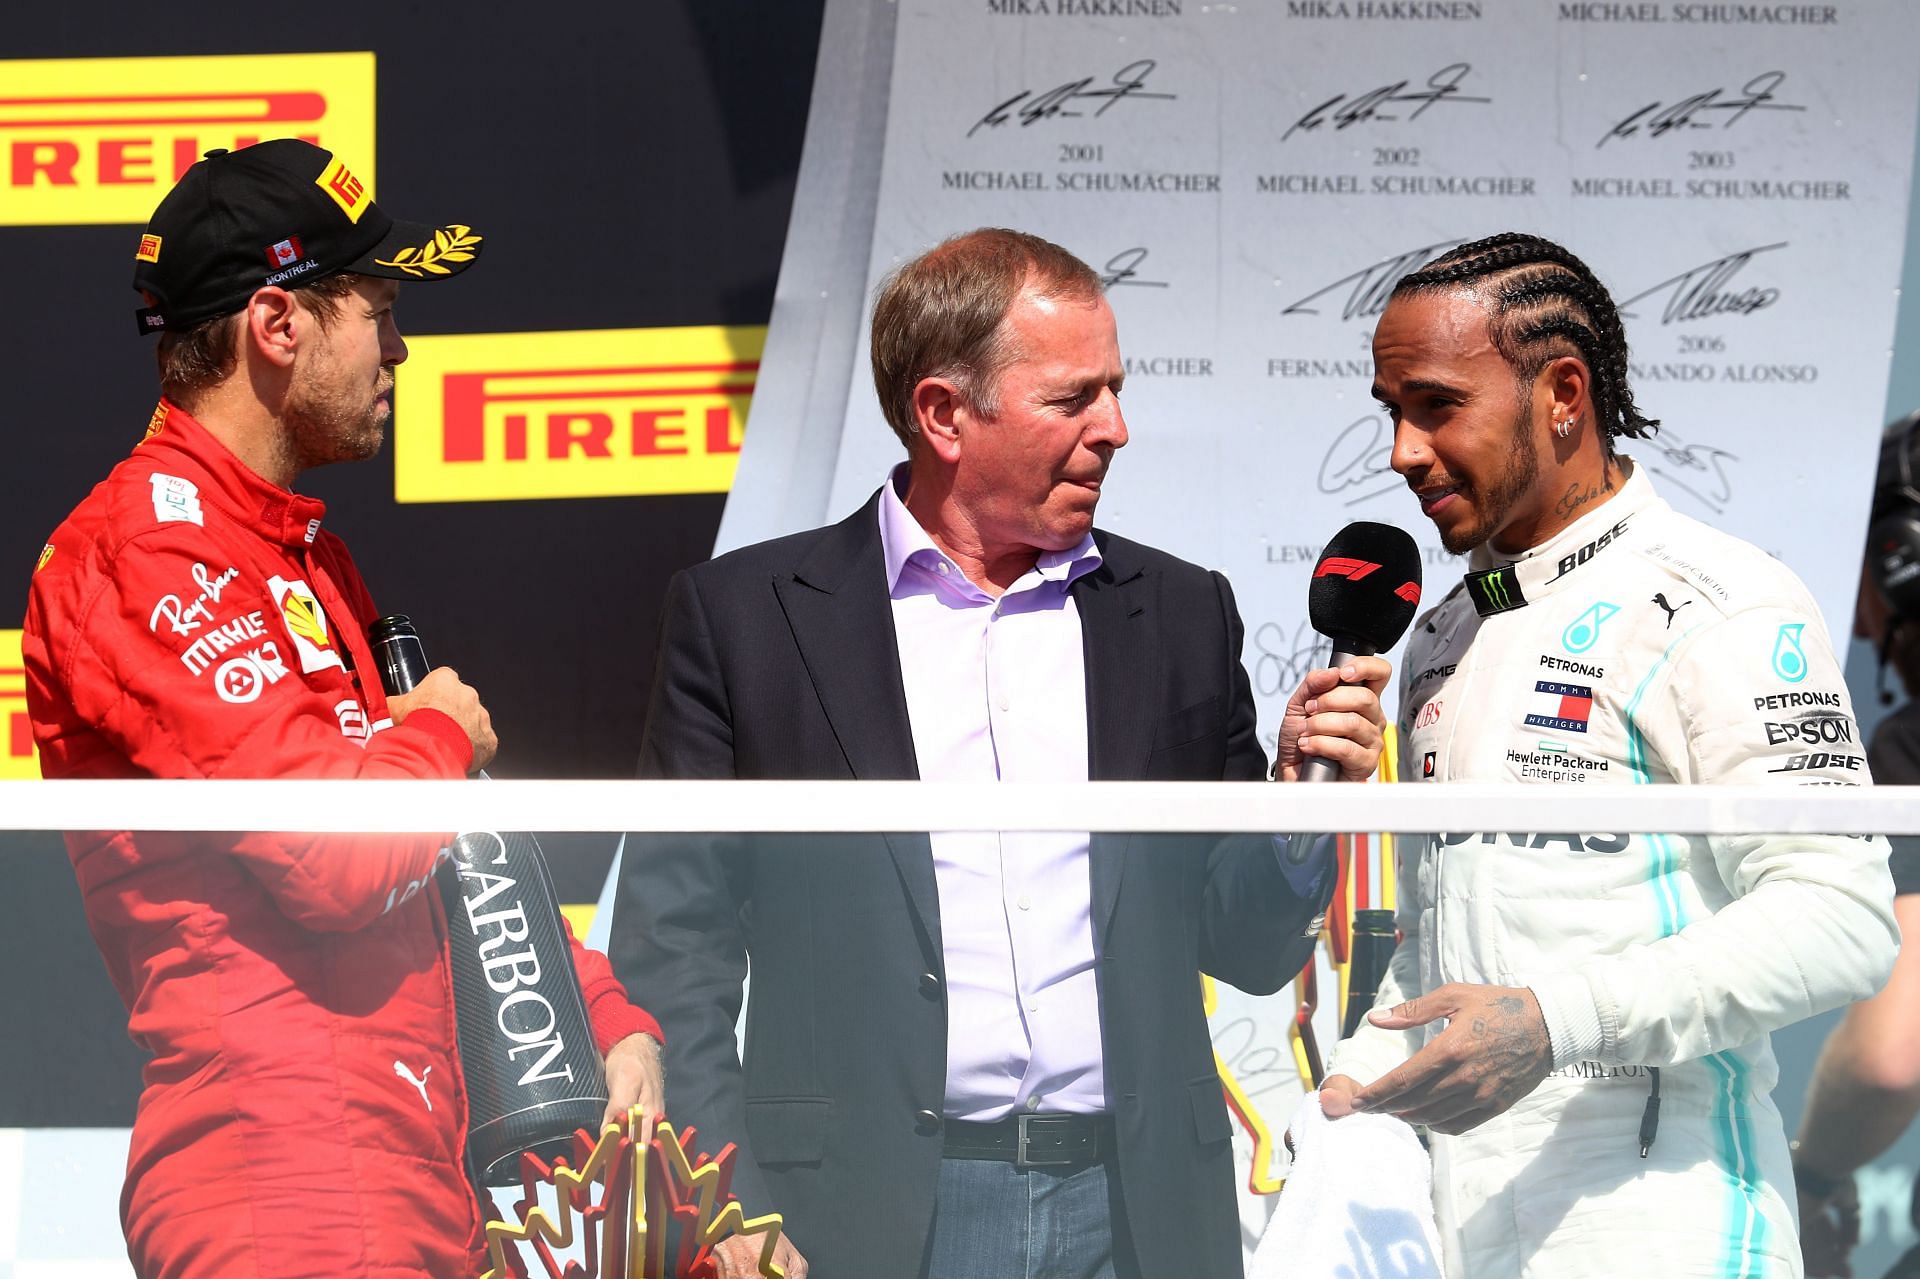 Lewis Hamilton and Martin Brundle on the podium during the Canadian GP. (Photo by Mark Thompson/Getty Images)